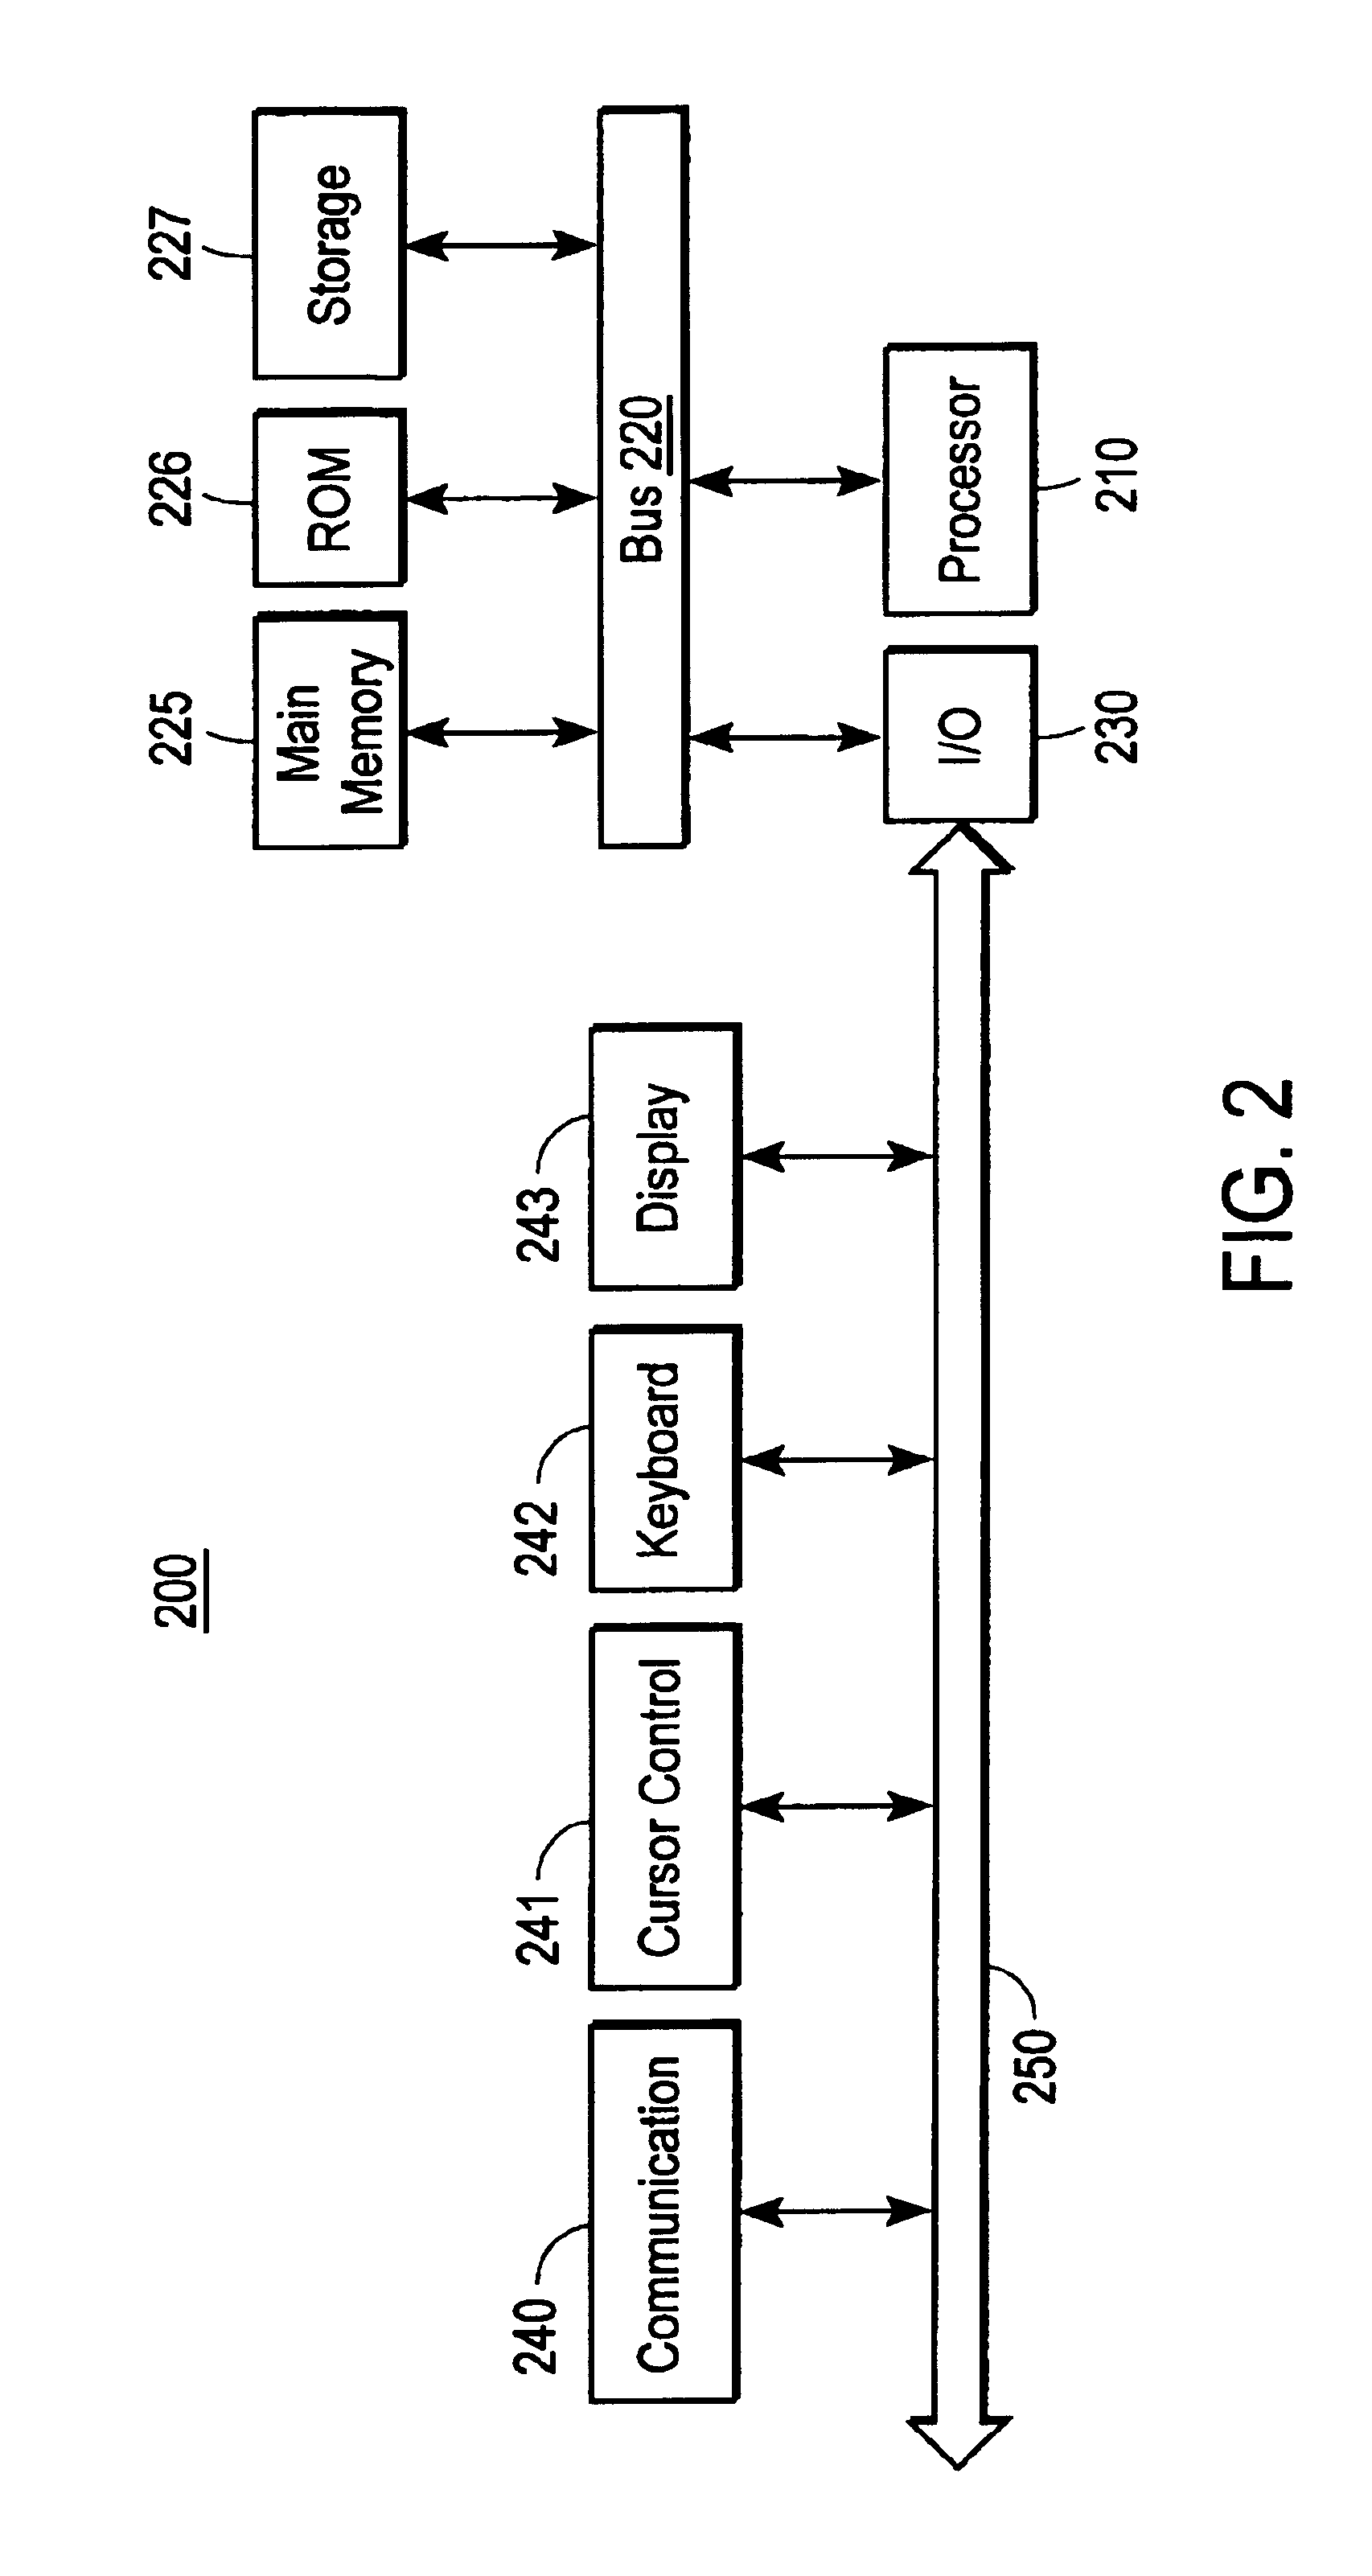 Contact routing system and method